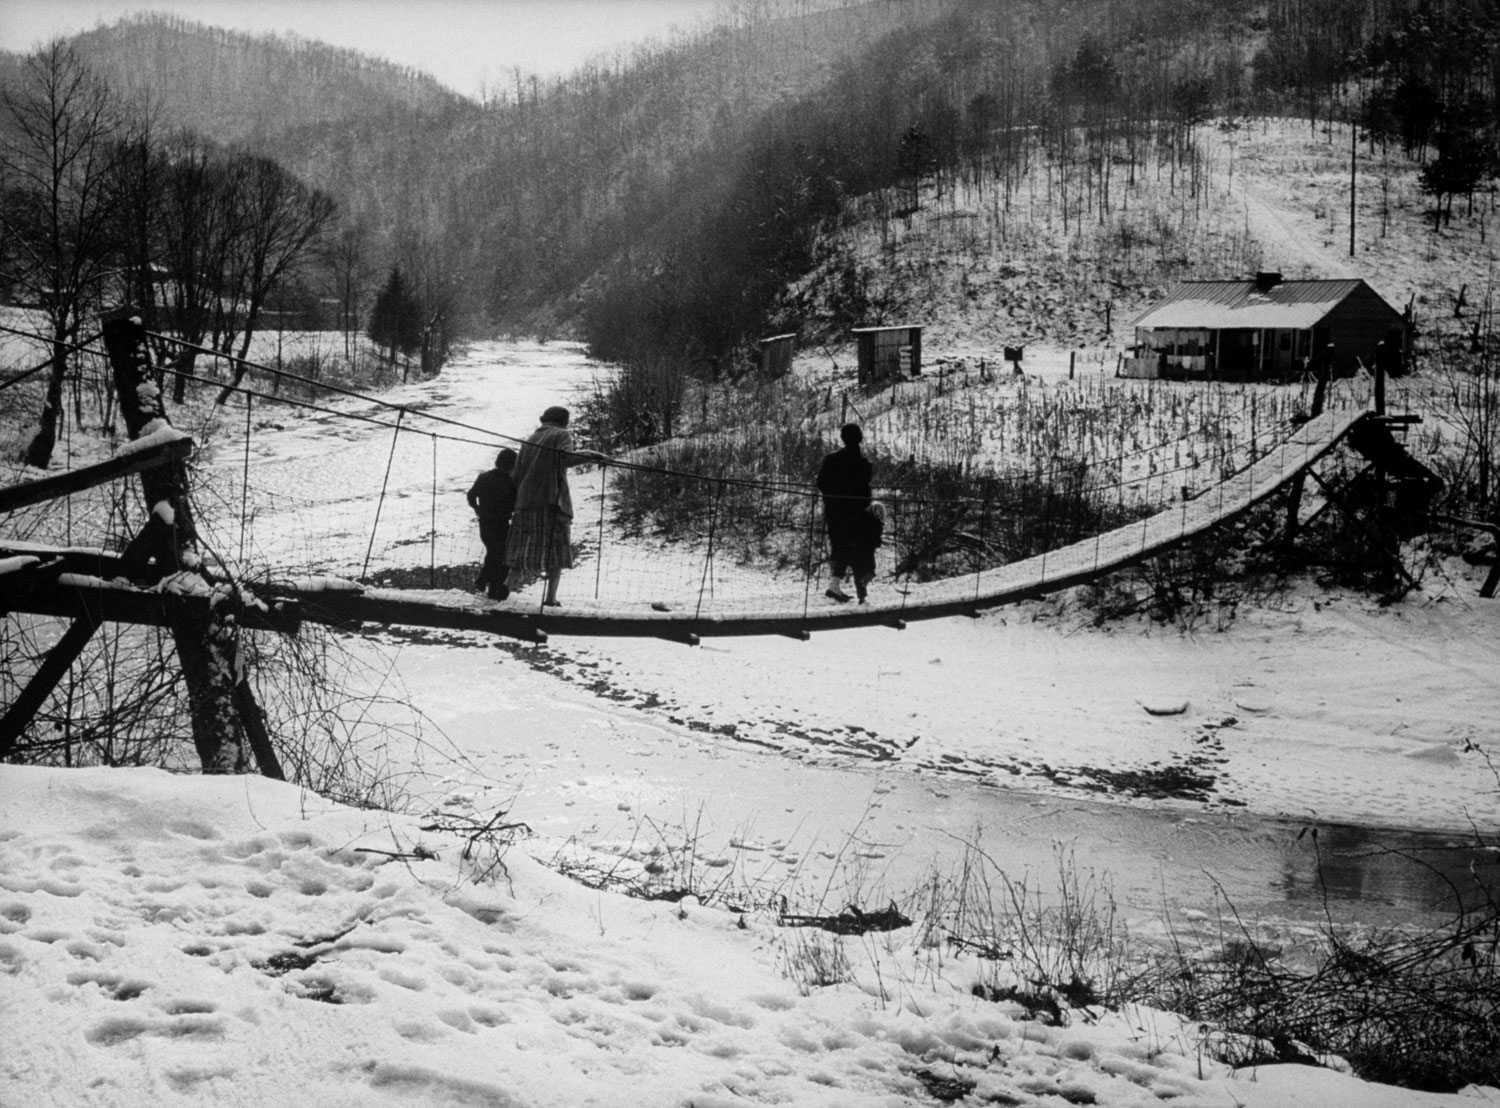 On a wintry afternoon in Line Fork Creek a family trudges across a rickety suspension bridge over a sewage-polluted stream to its two-room shack.